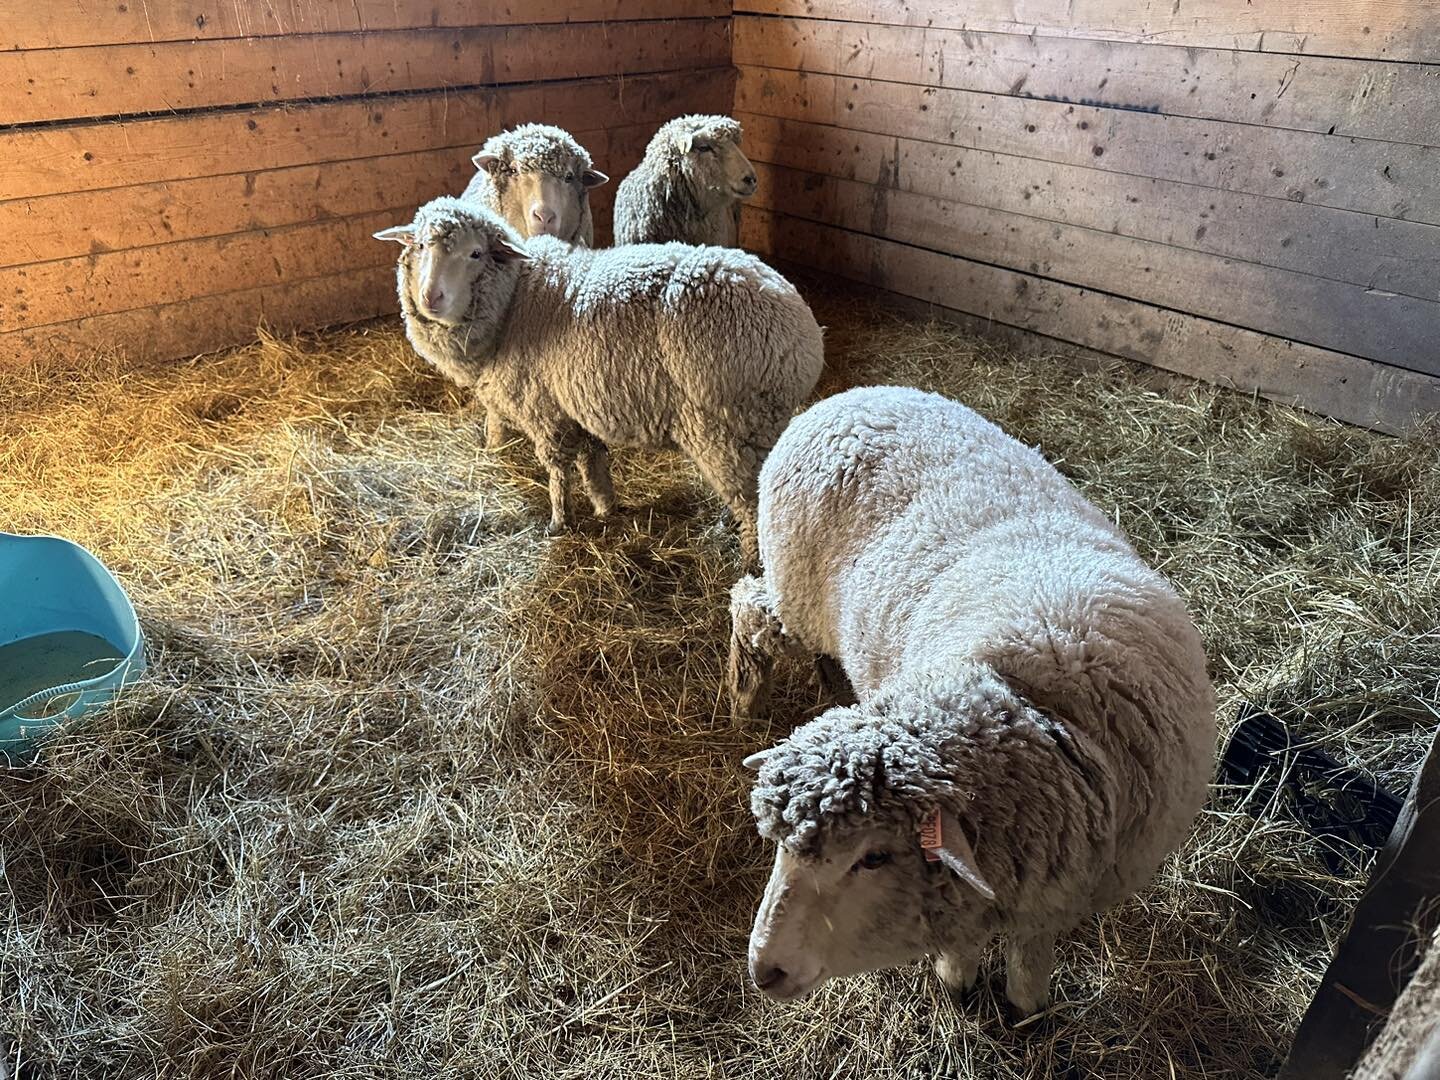 Our sweet new additions! Pure Cormo sheep. They have exceptional wool, similar to the quality of merino. Two retired ladies and two lambs! The moms came with names: Wren and Ramona. Our other lady lambs are Kiwi (brown) and Stout (black). These lambs